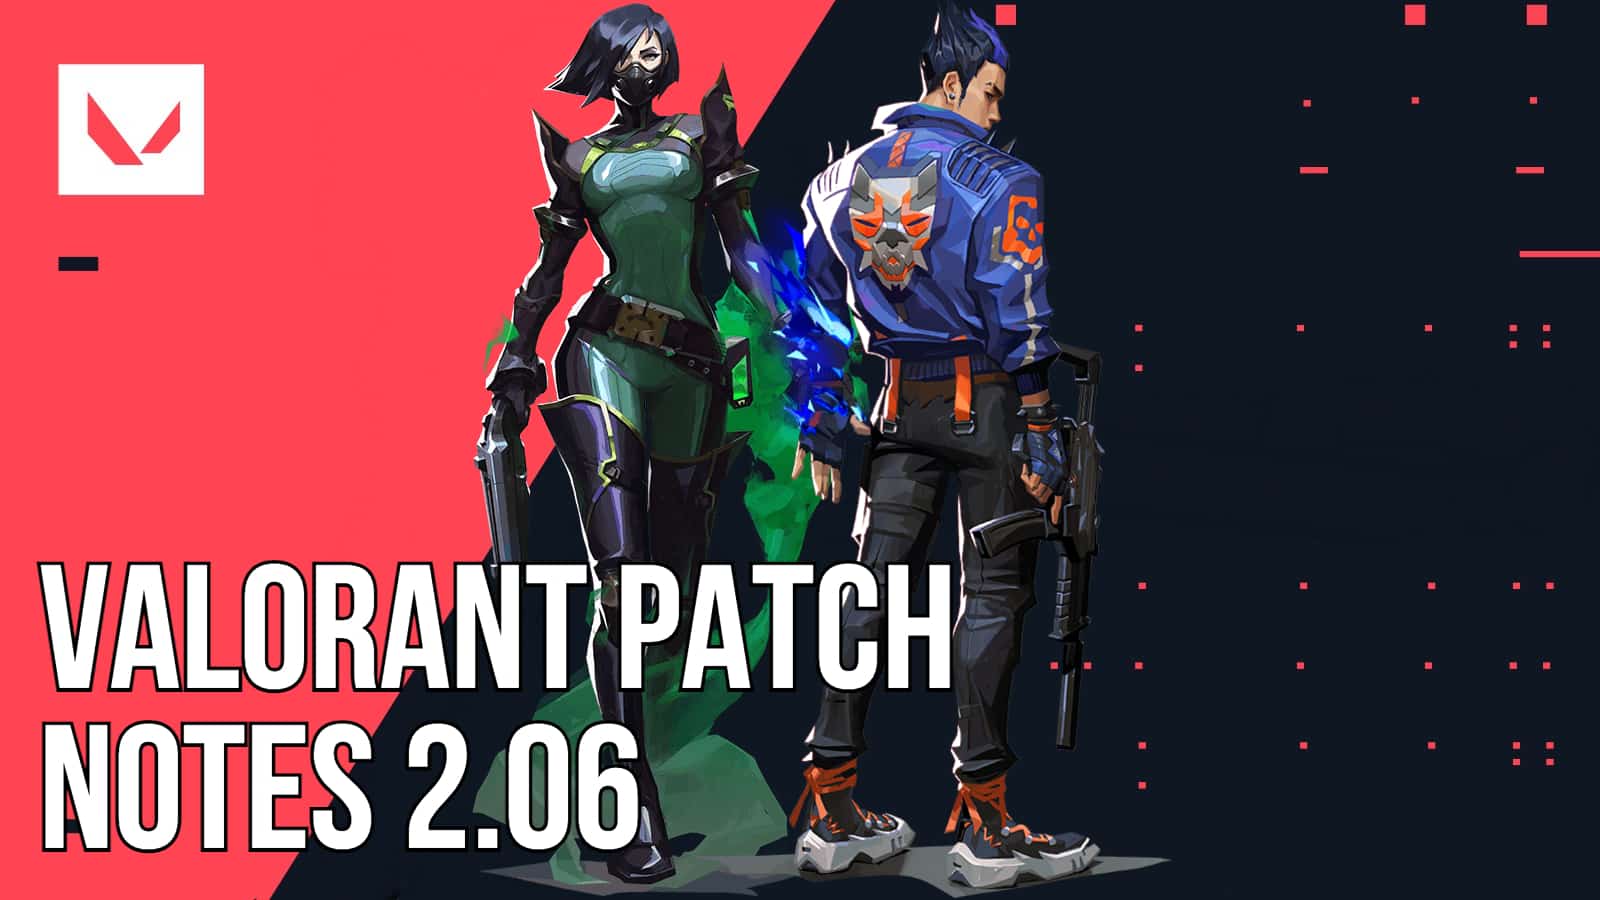 VALORANT Patch Notes 5.06